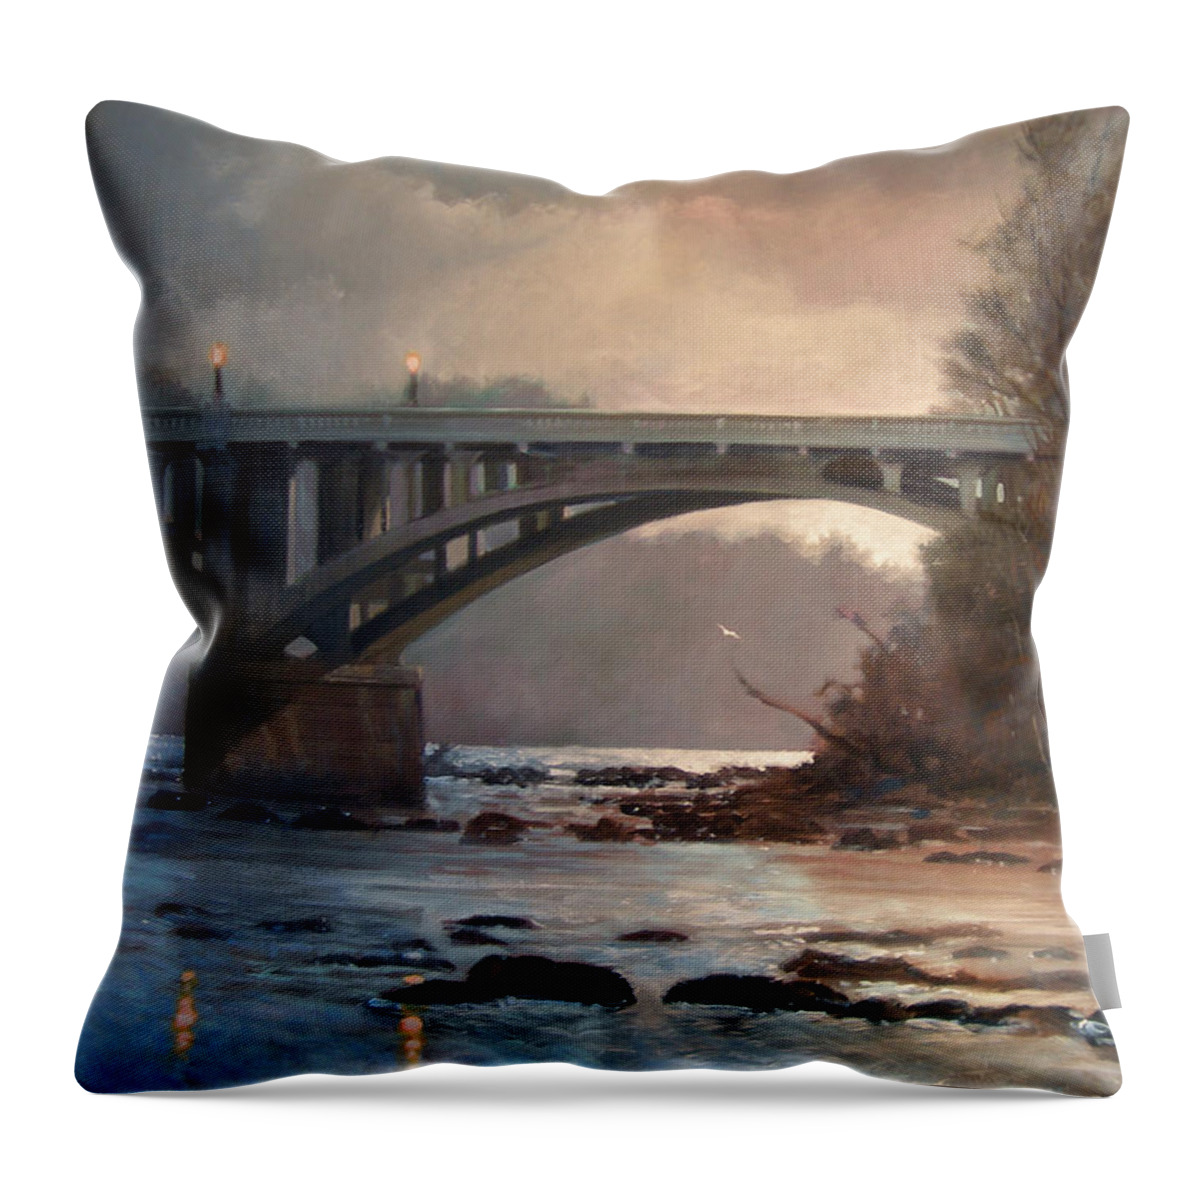 River Throw Pillow featuring the painting Rainy River by Blue Sky